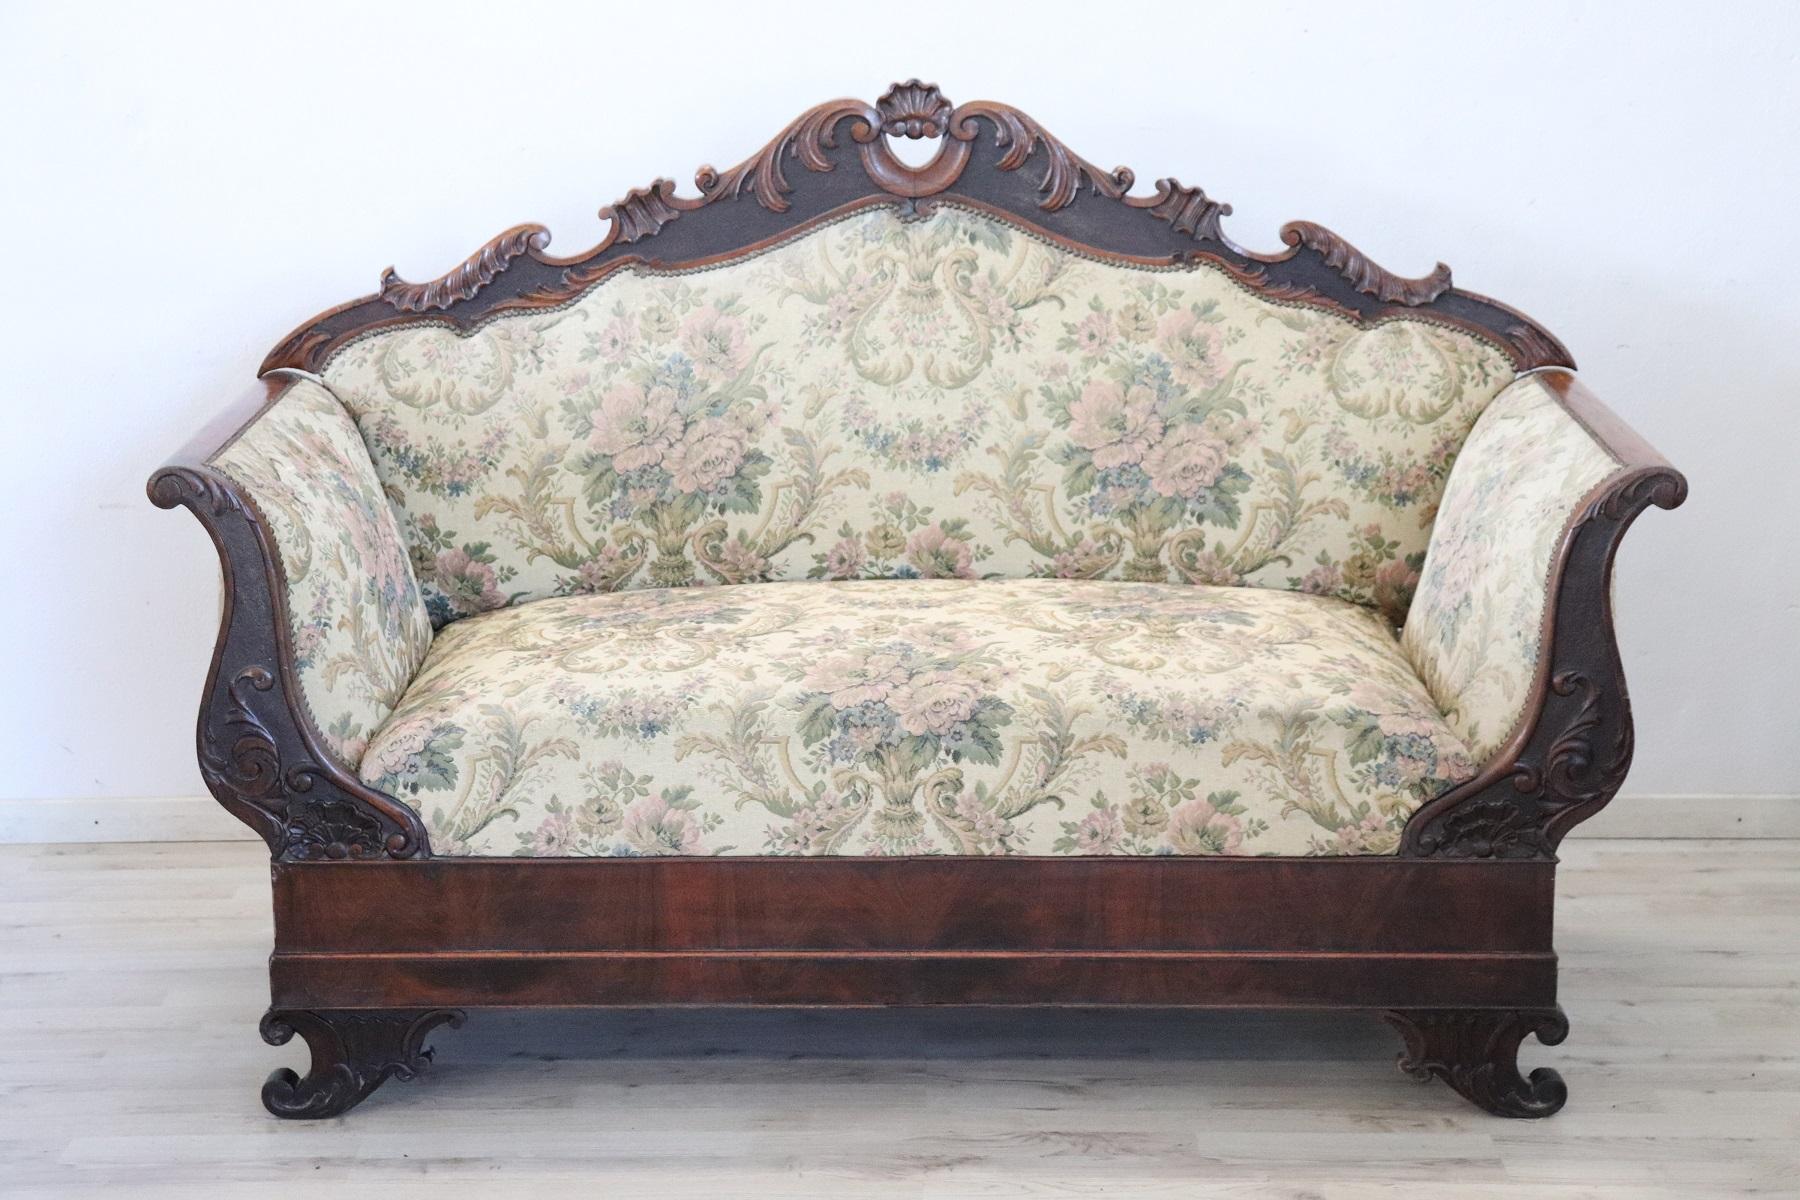 Antique settee 1825s in full Charles X era. The settee is made of solid walnut hand carved. Ancient fabric with floral decoration. Excellent condition of the wood, signs of wear on the fabric.